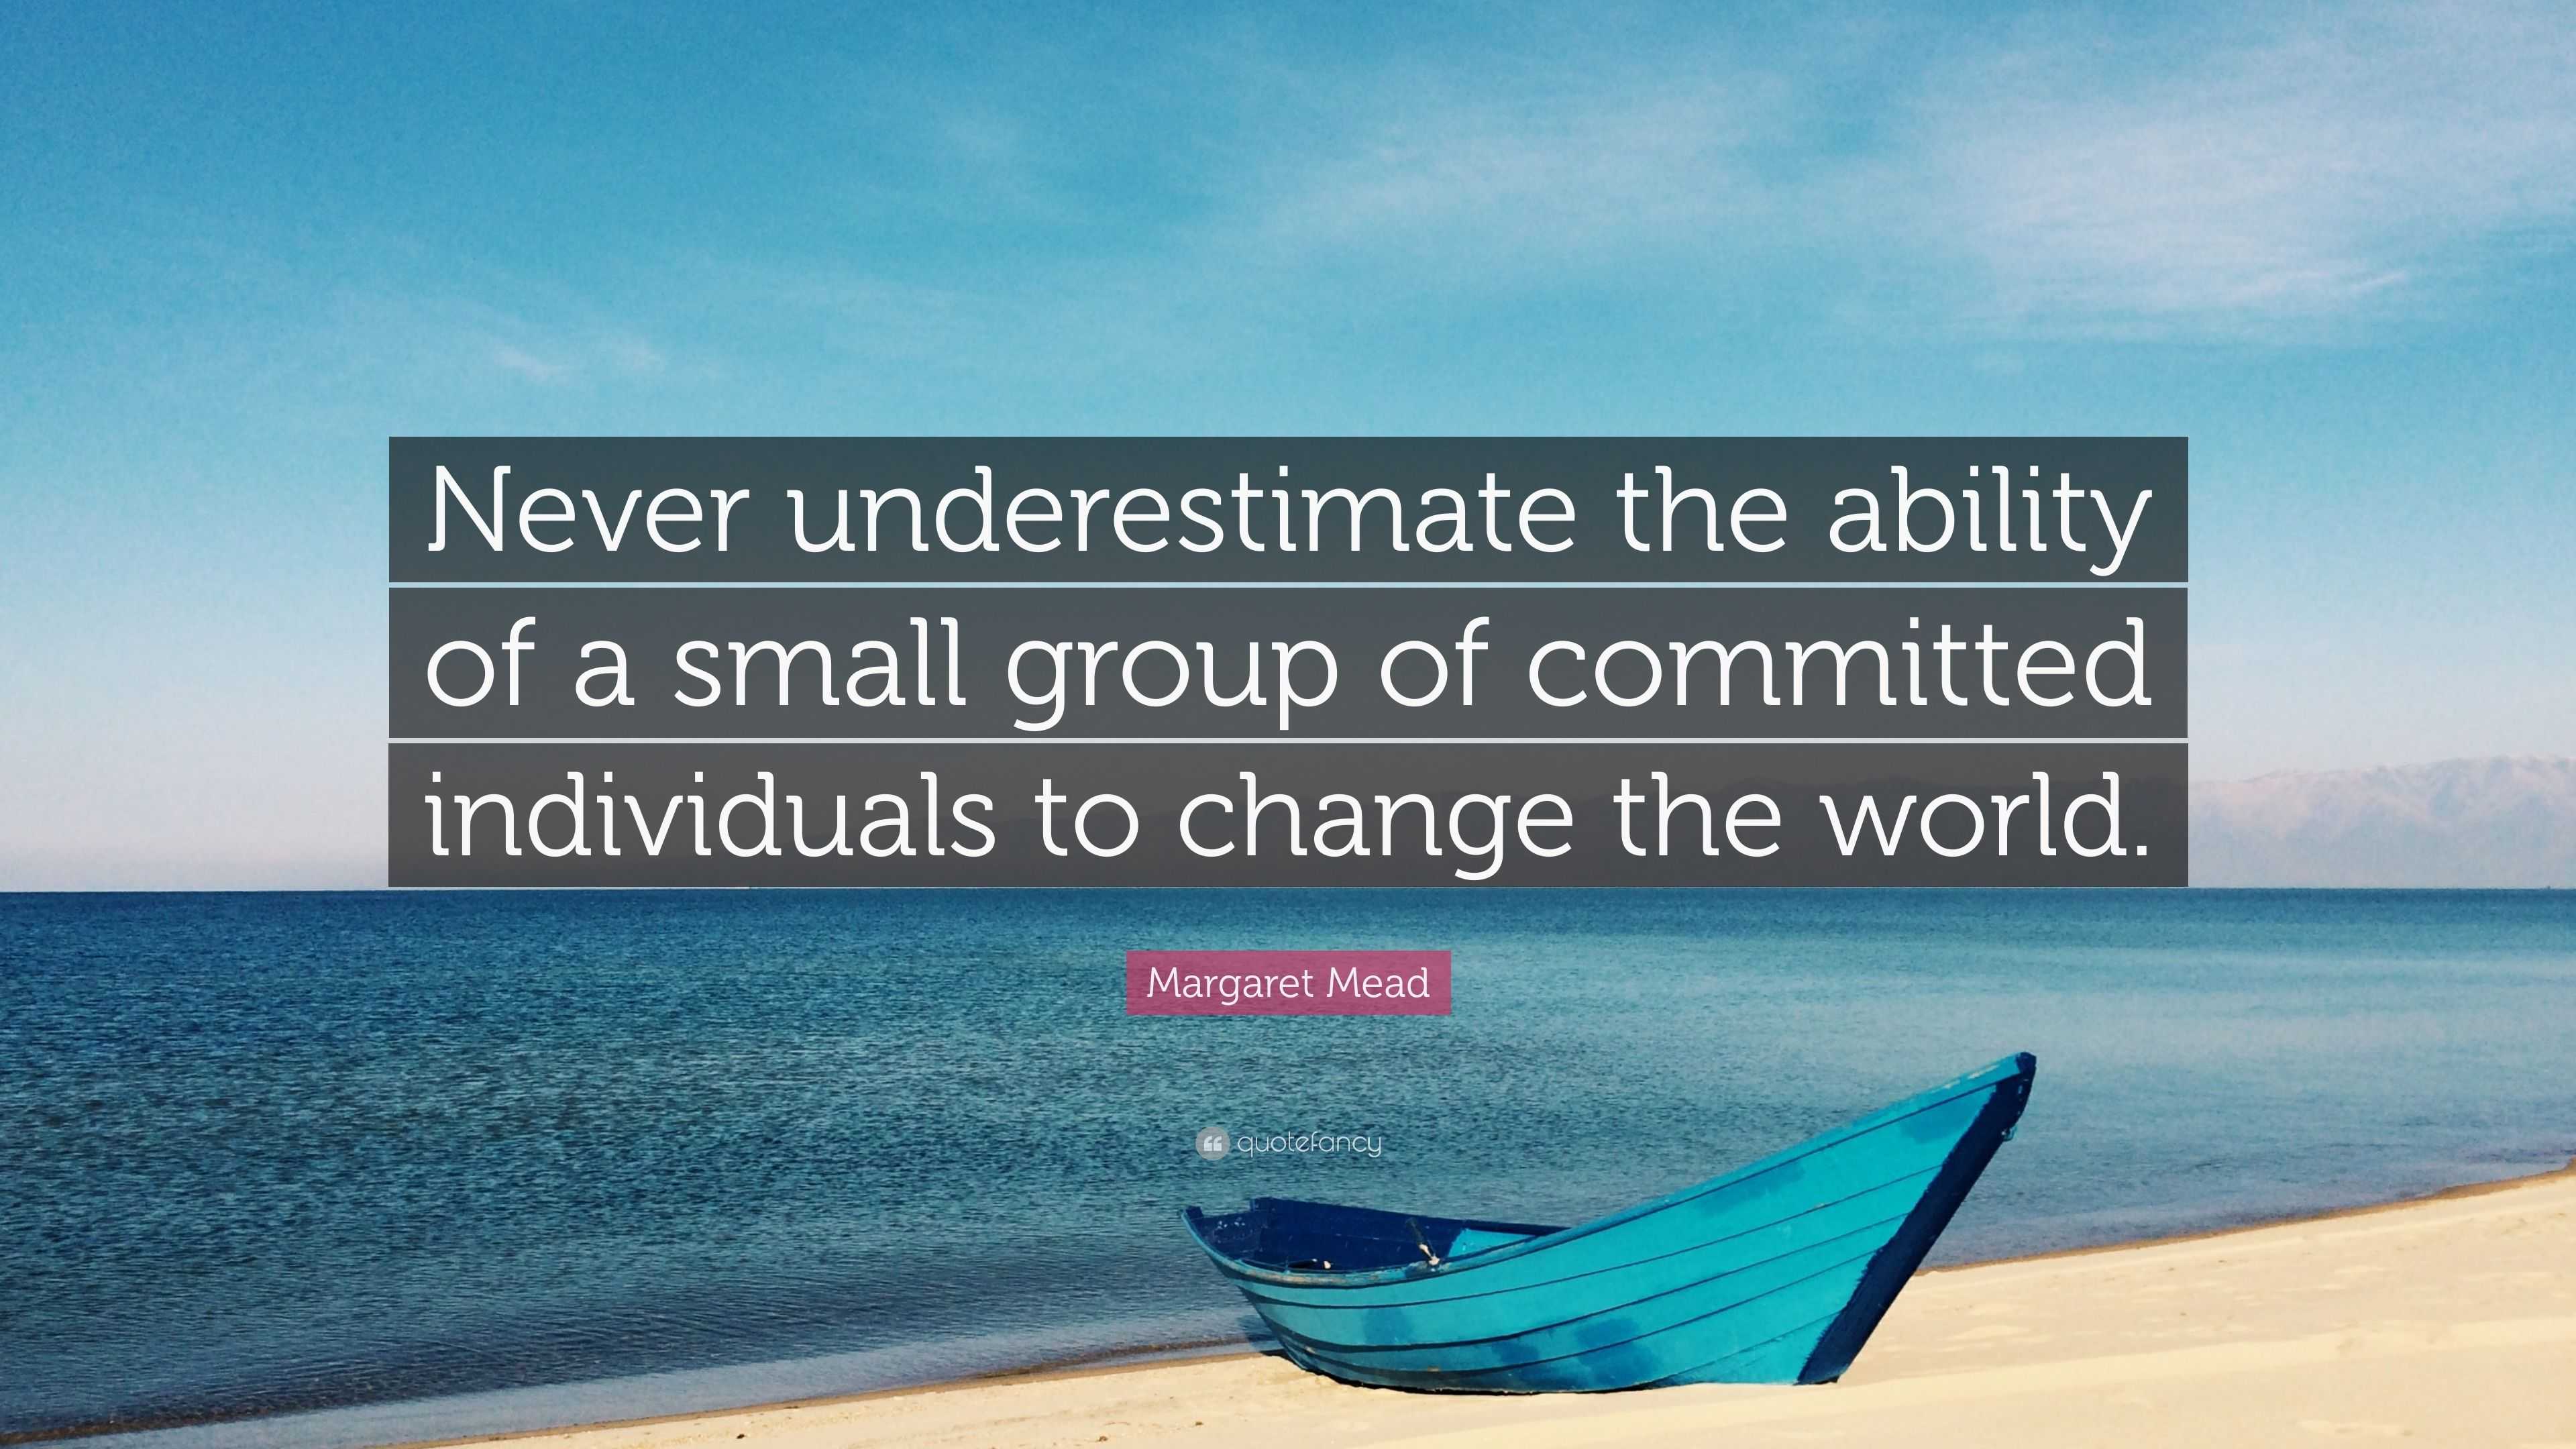 Margaret Mead Quote: "Never underestimate the ability of a ...